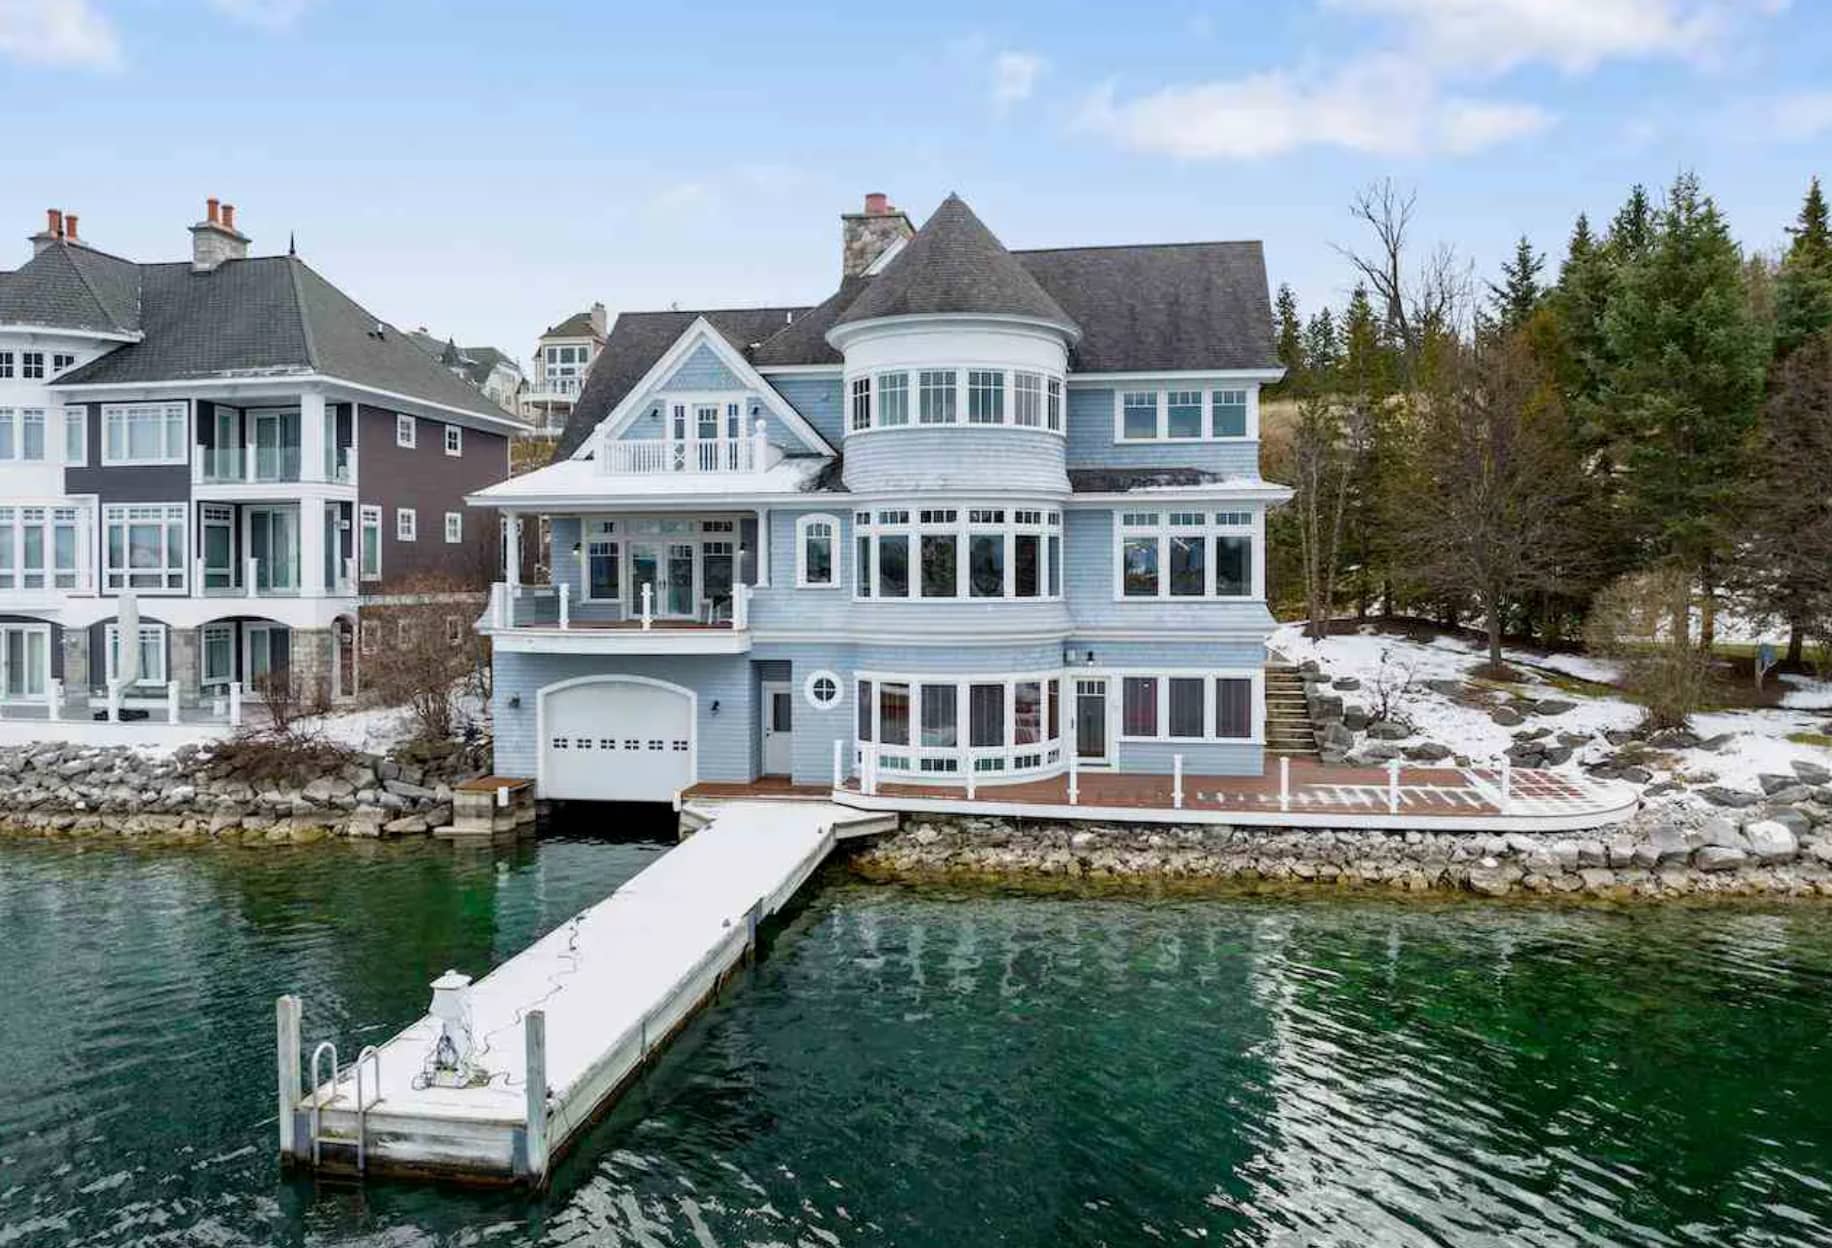 Waterfront Home In Bay Harbor, Michigan (PHOTOS)